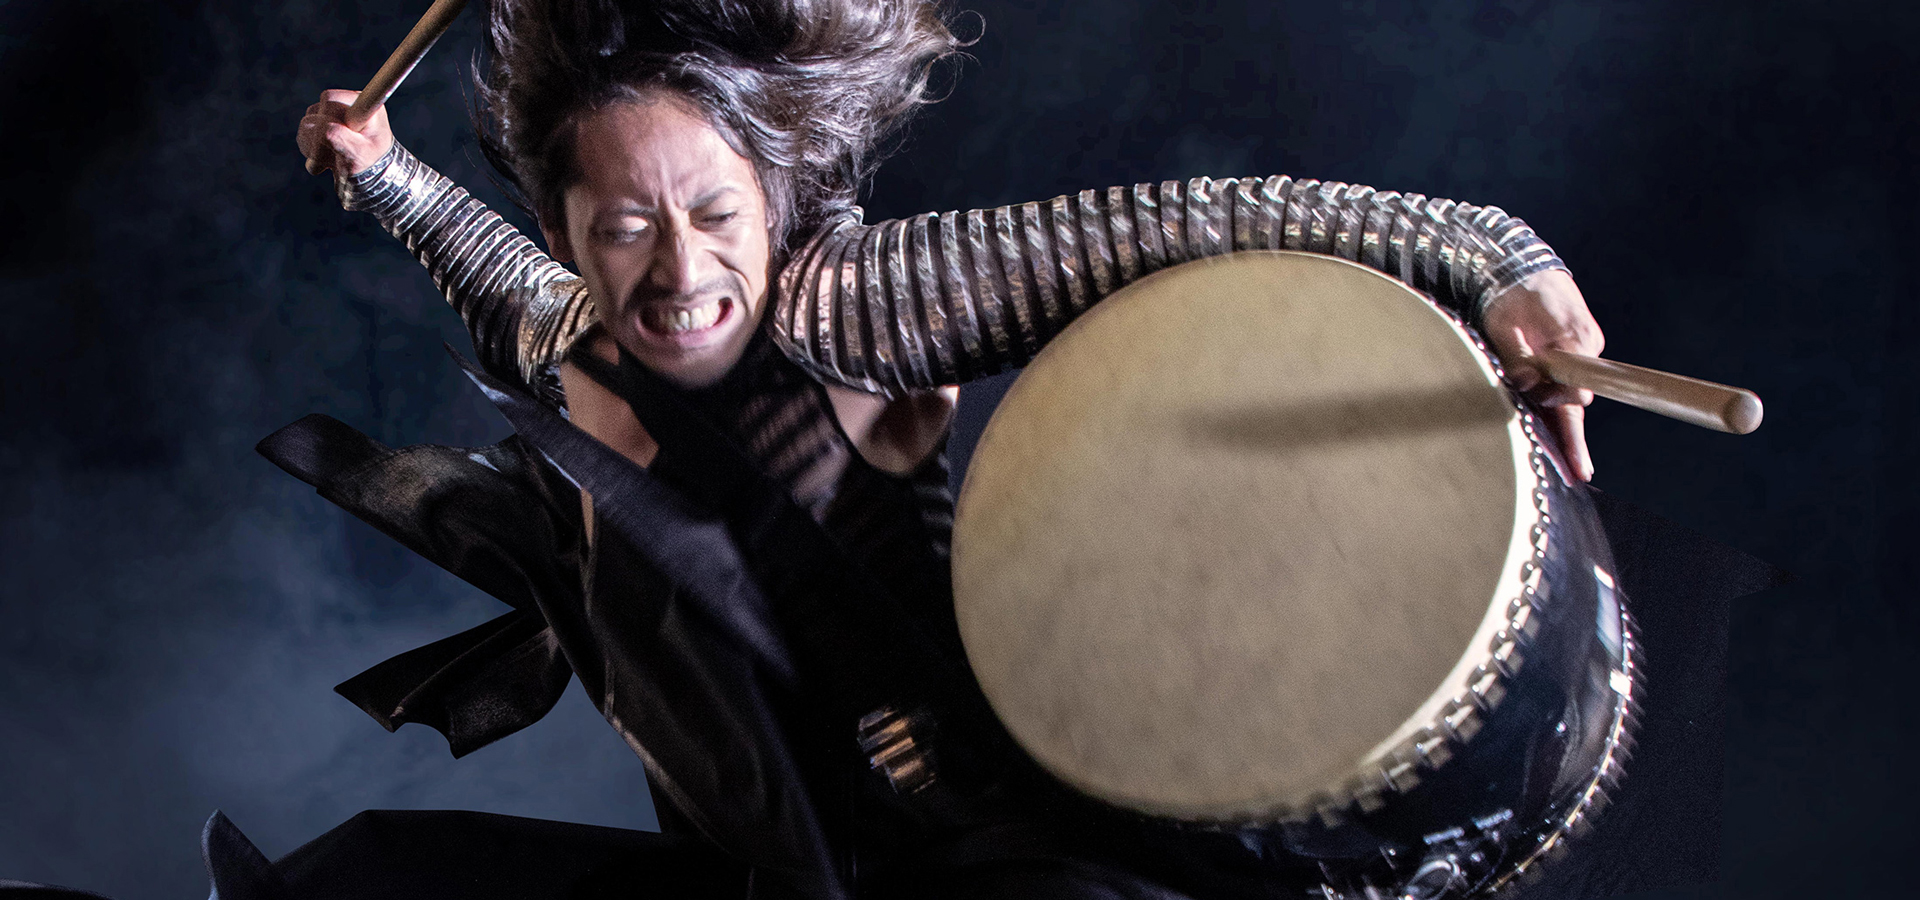 A close up image of a long-haired Drum Tao performer rearing his arm to beat the large drum that he holds under his left shoulder, wearing elaborate silver arm bands.